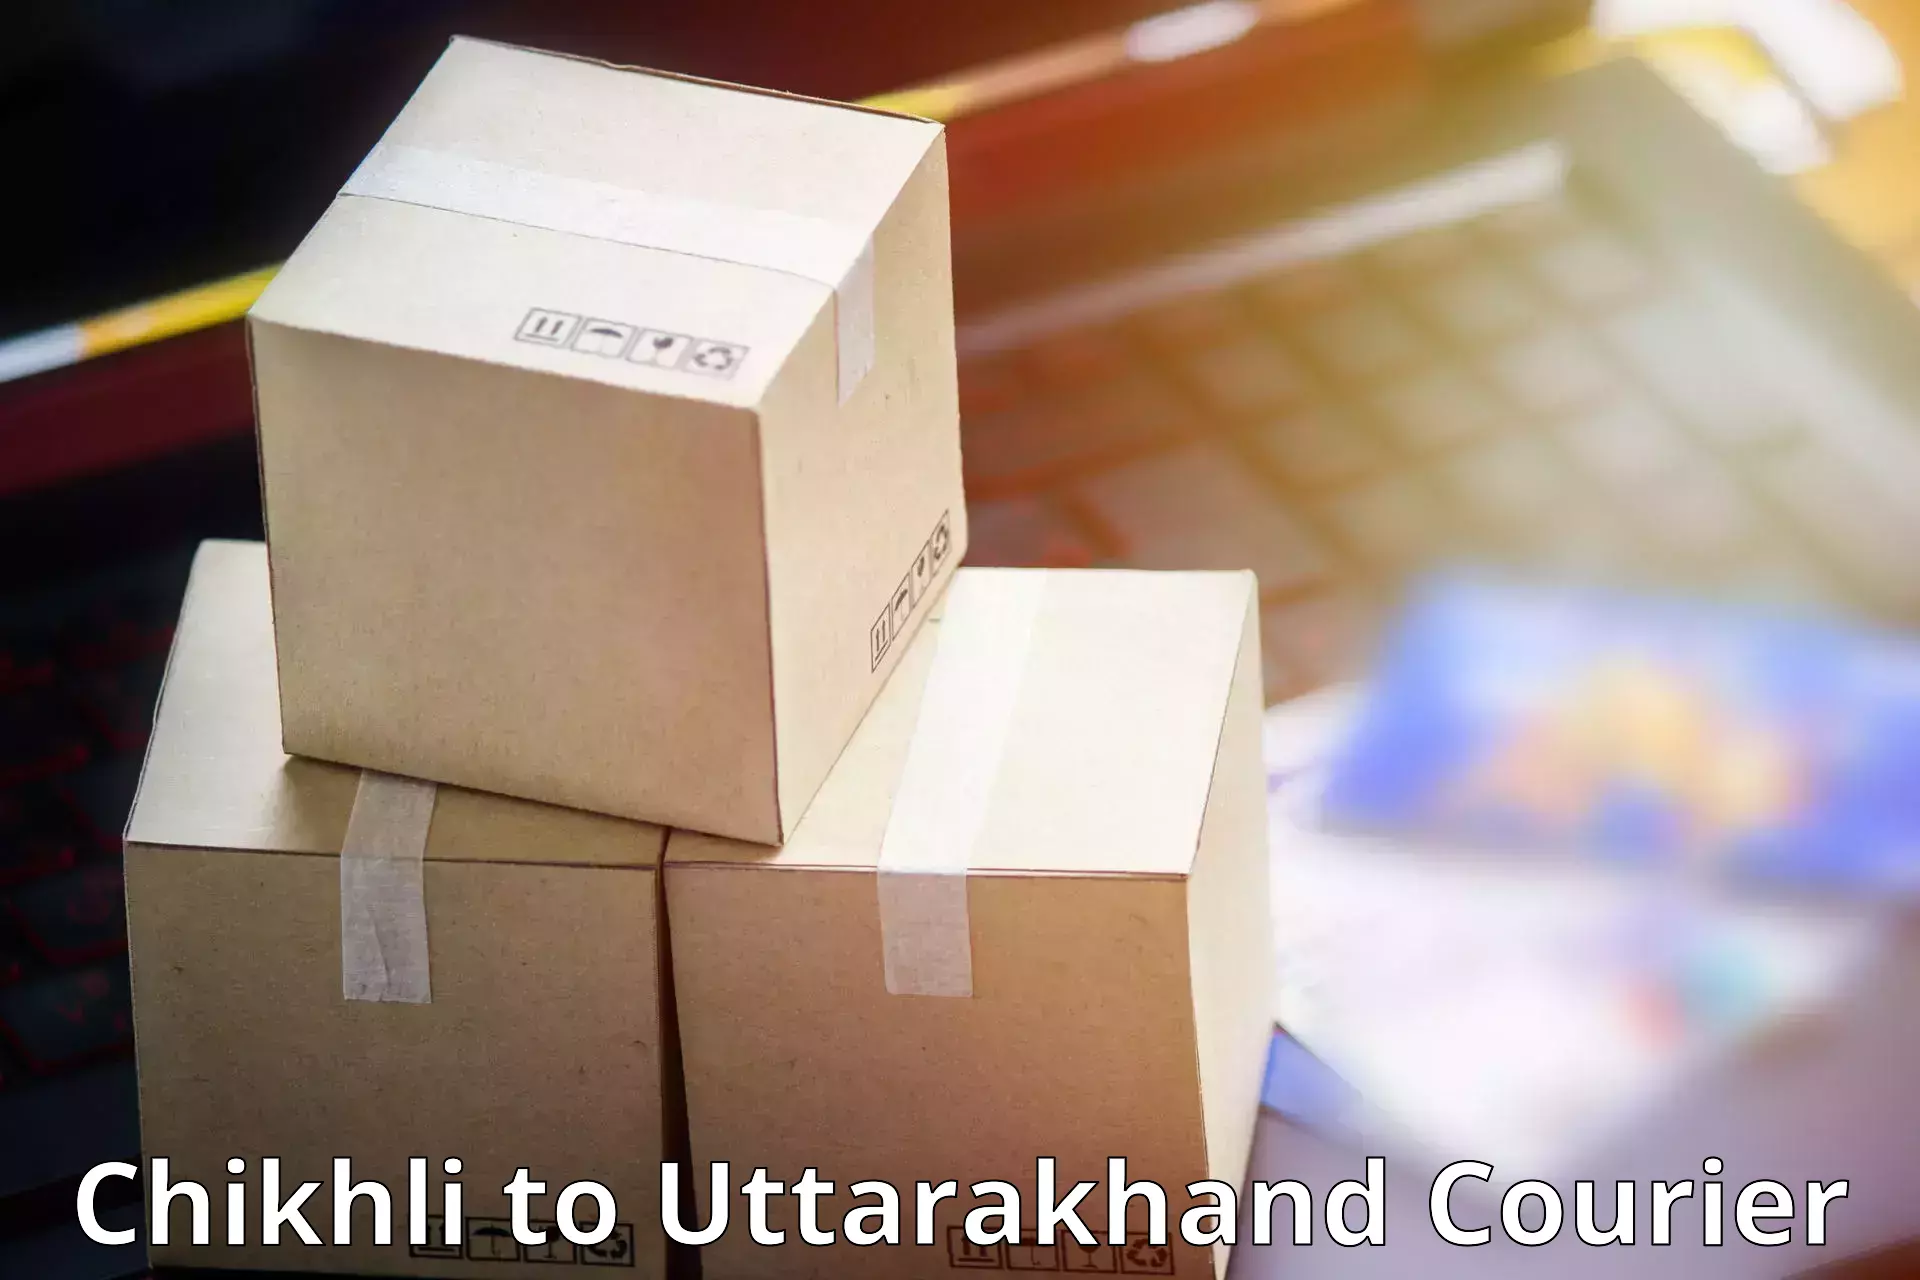 Global courier networks Chikhli to Khatima